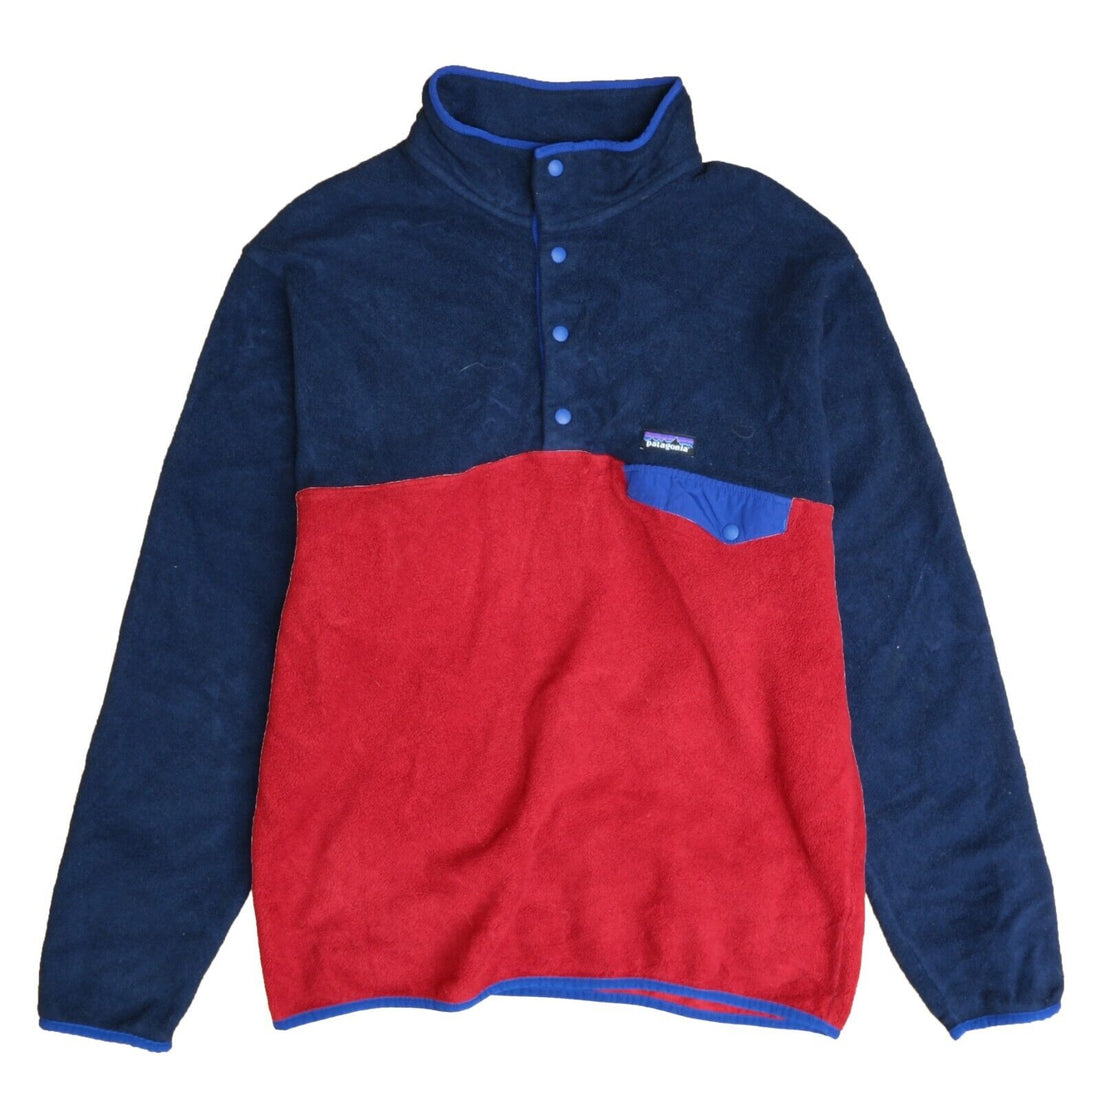 Patagonia Synchilla Snap-T Fleece Jacket Size Large Red Blue